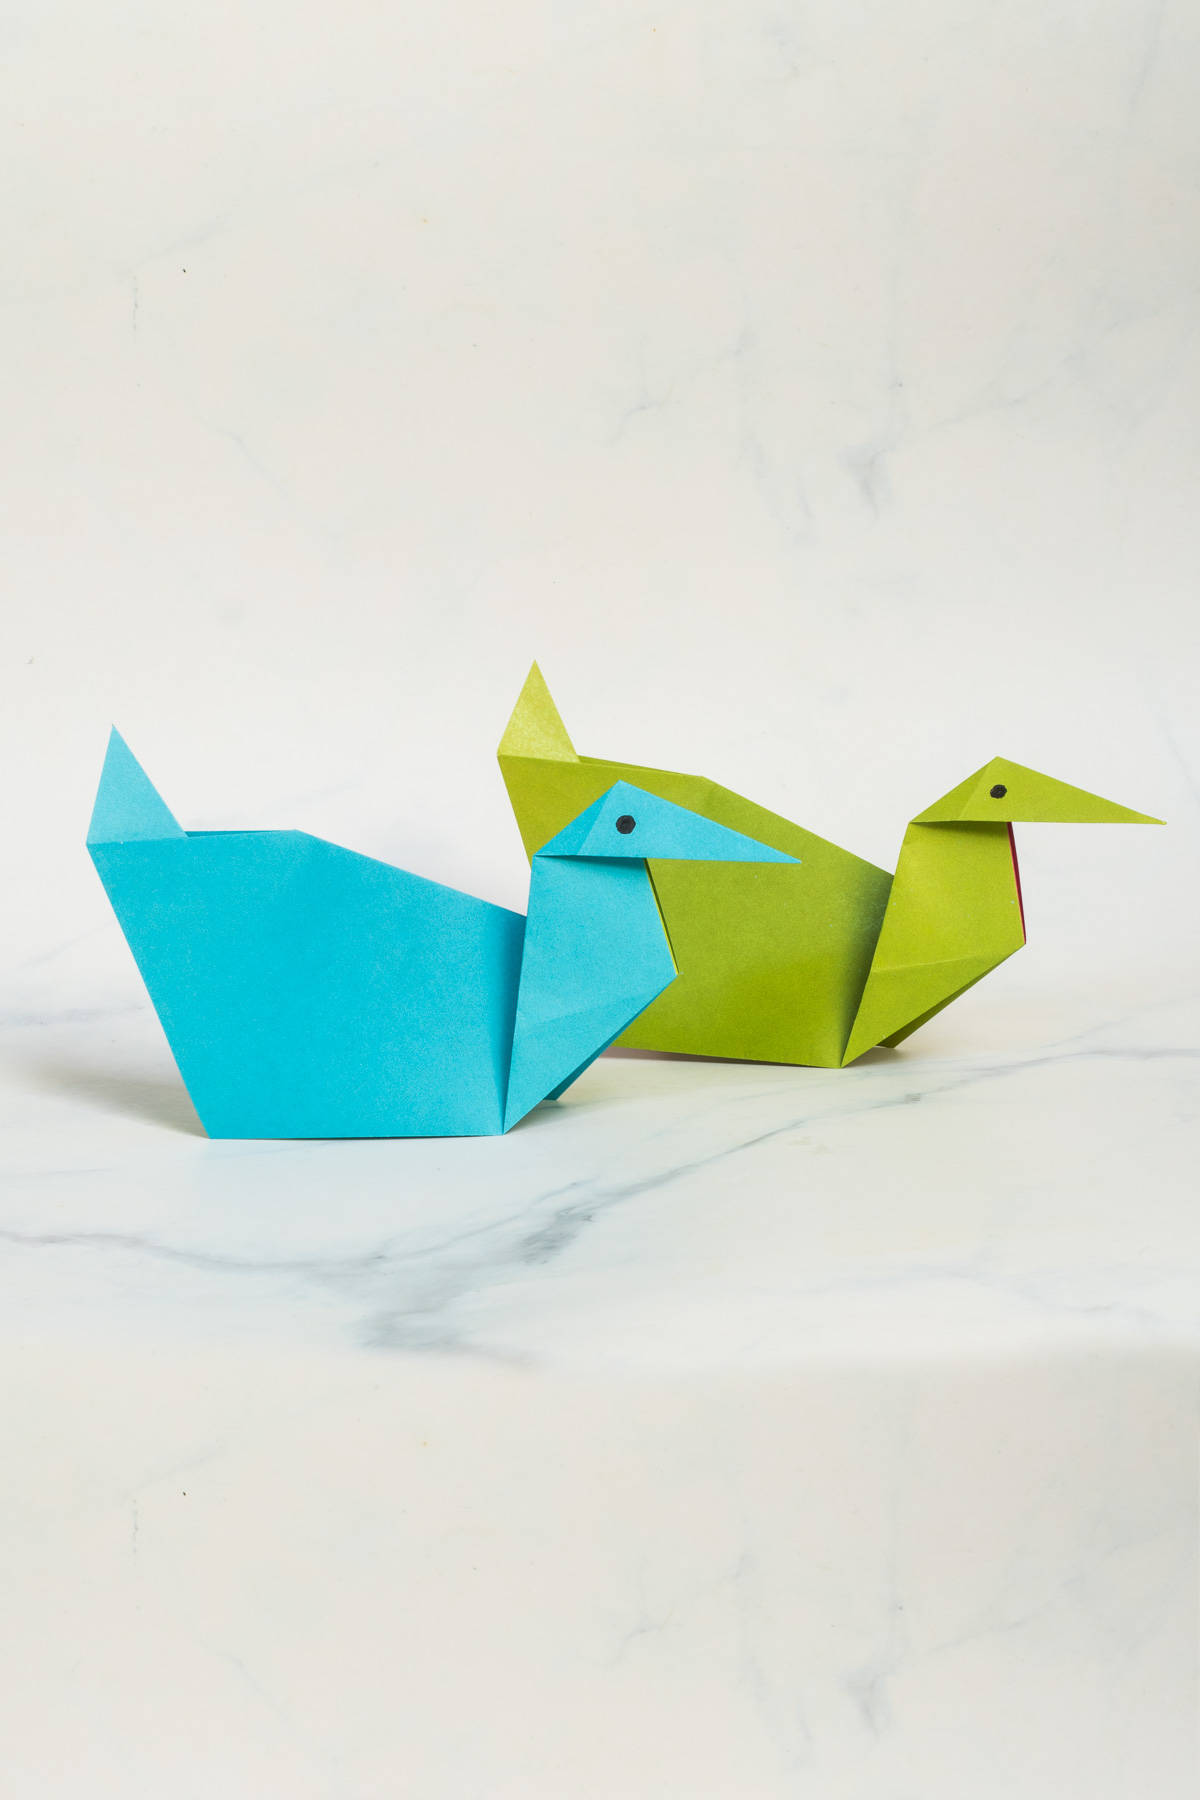 2 origami ducks against a marble background.